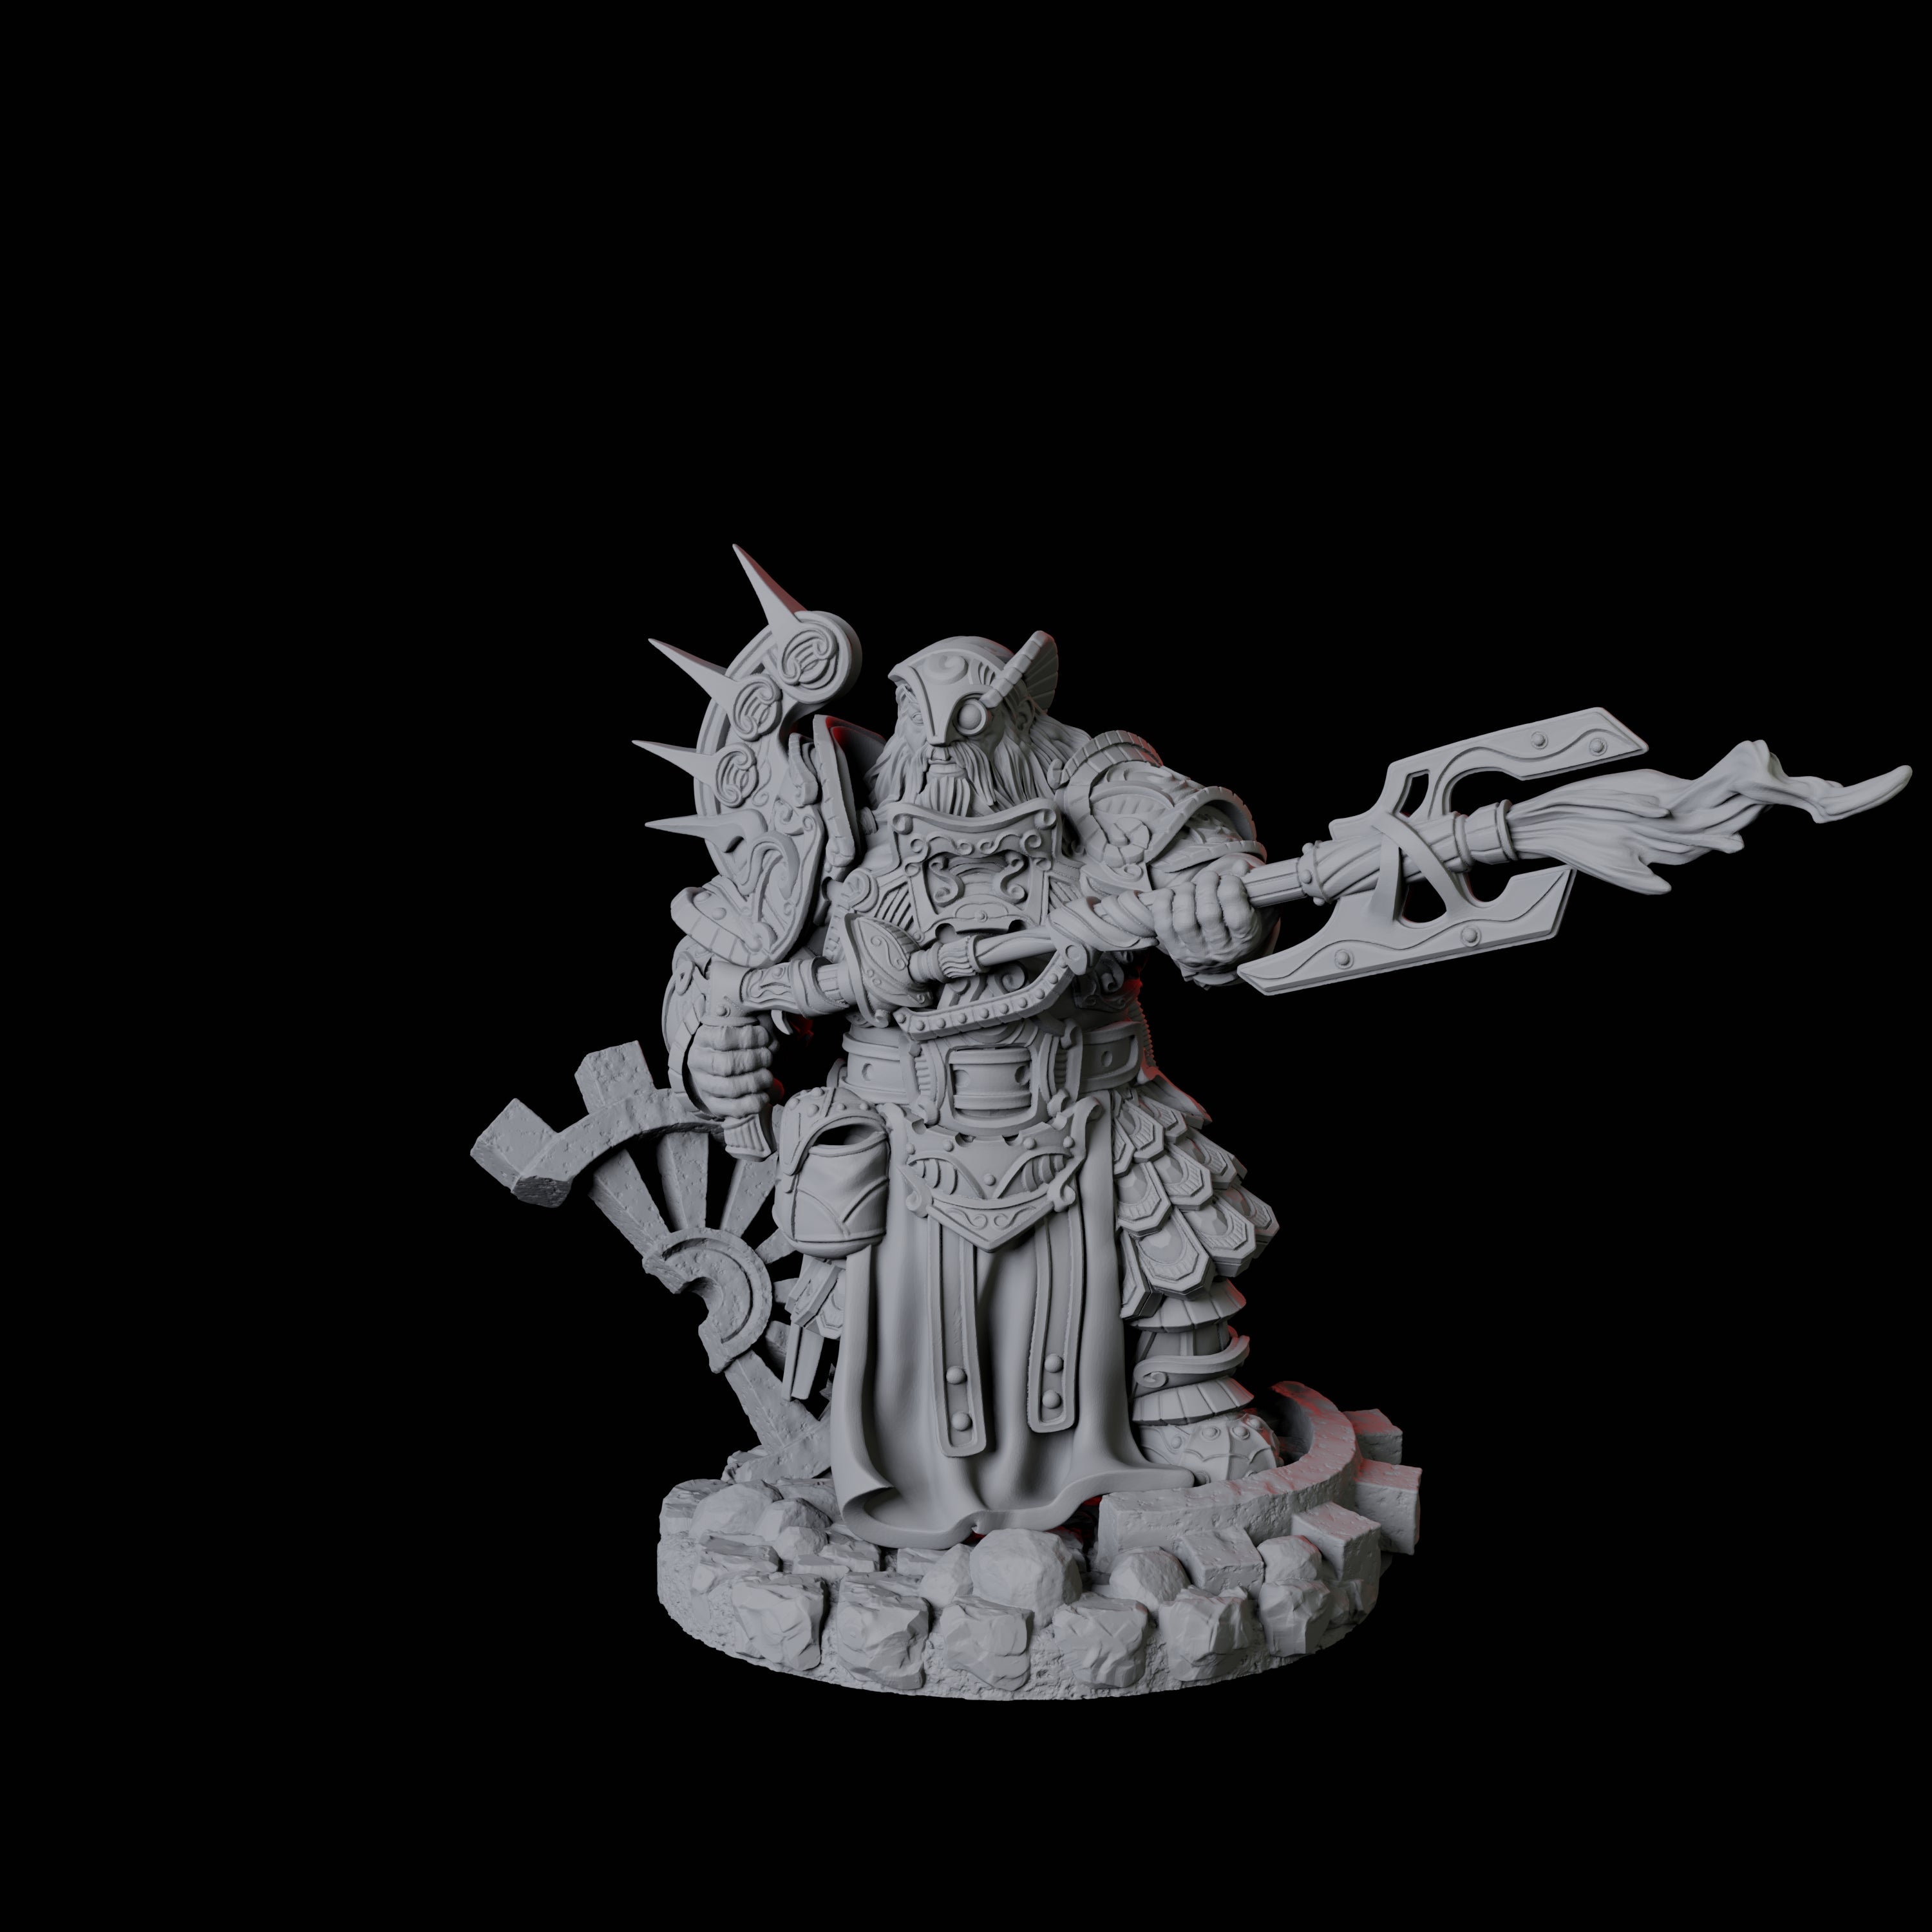 Dwarf Artificer Engineer C Miniature for Dungeons and Dragons, Pathfinder or other TTRPGs